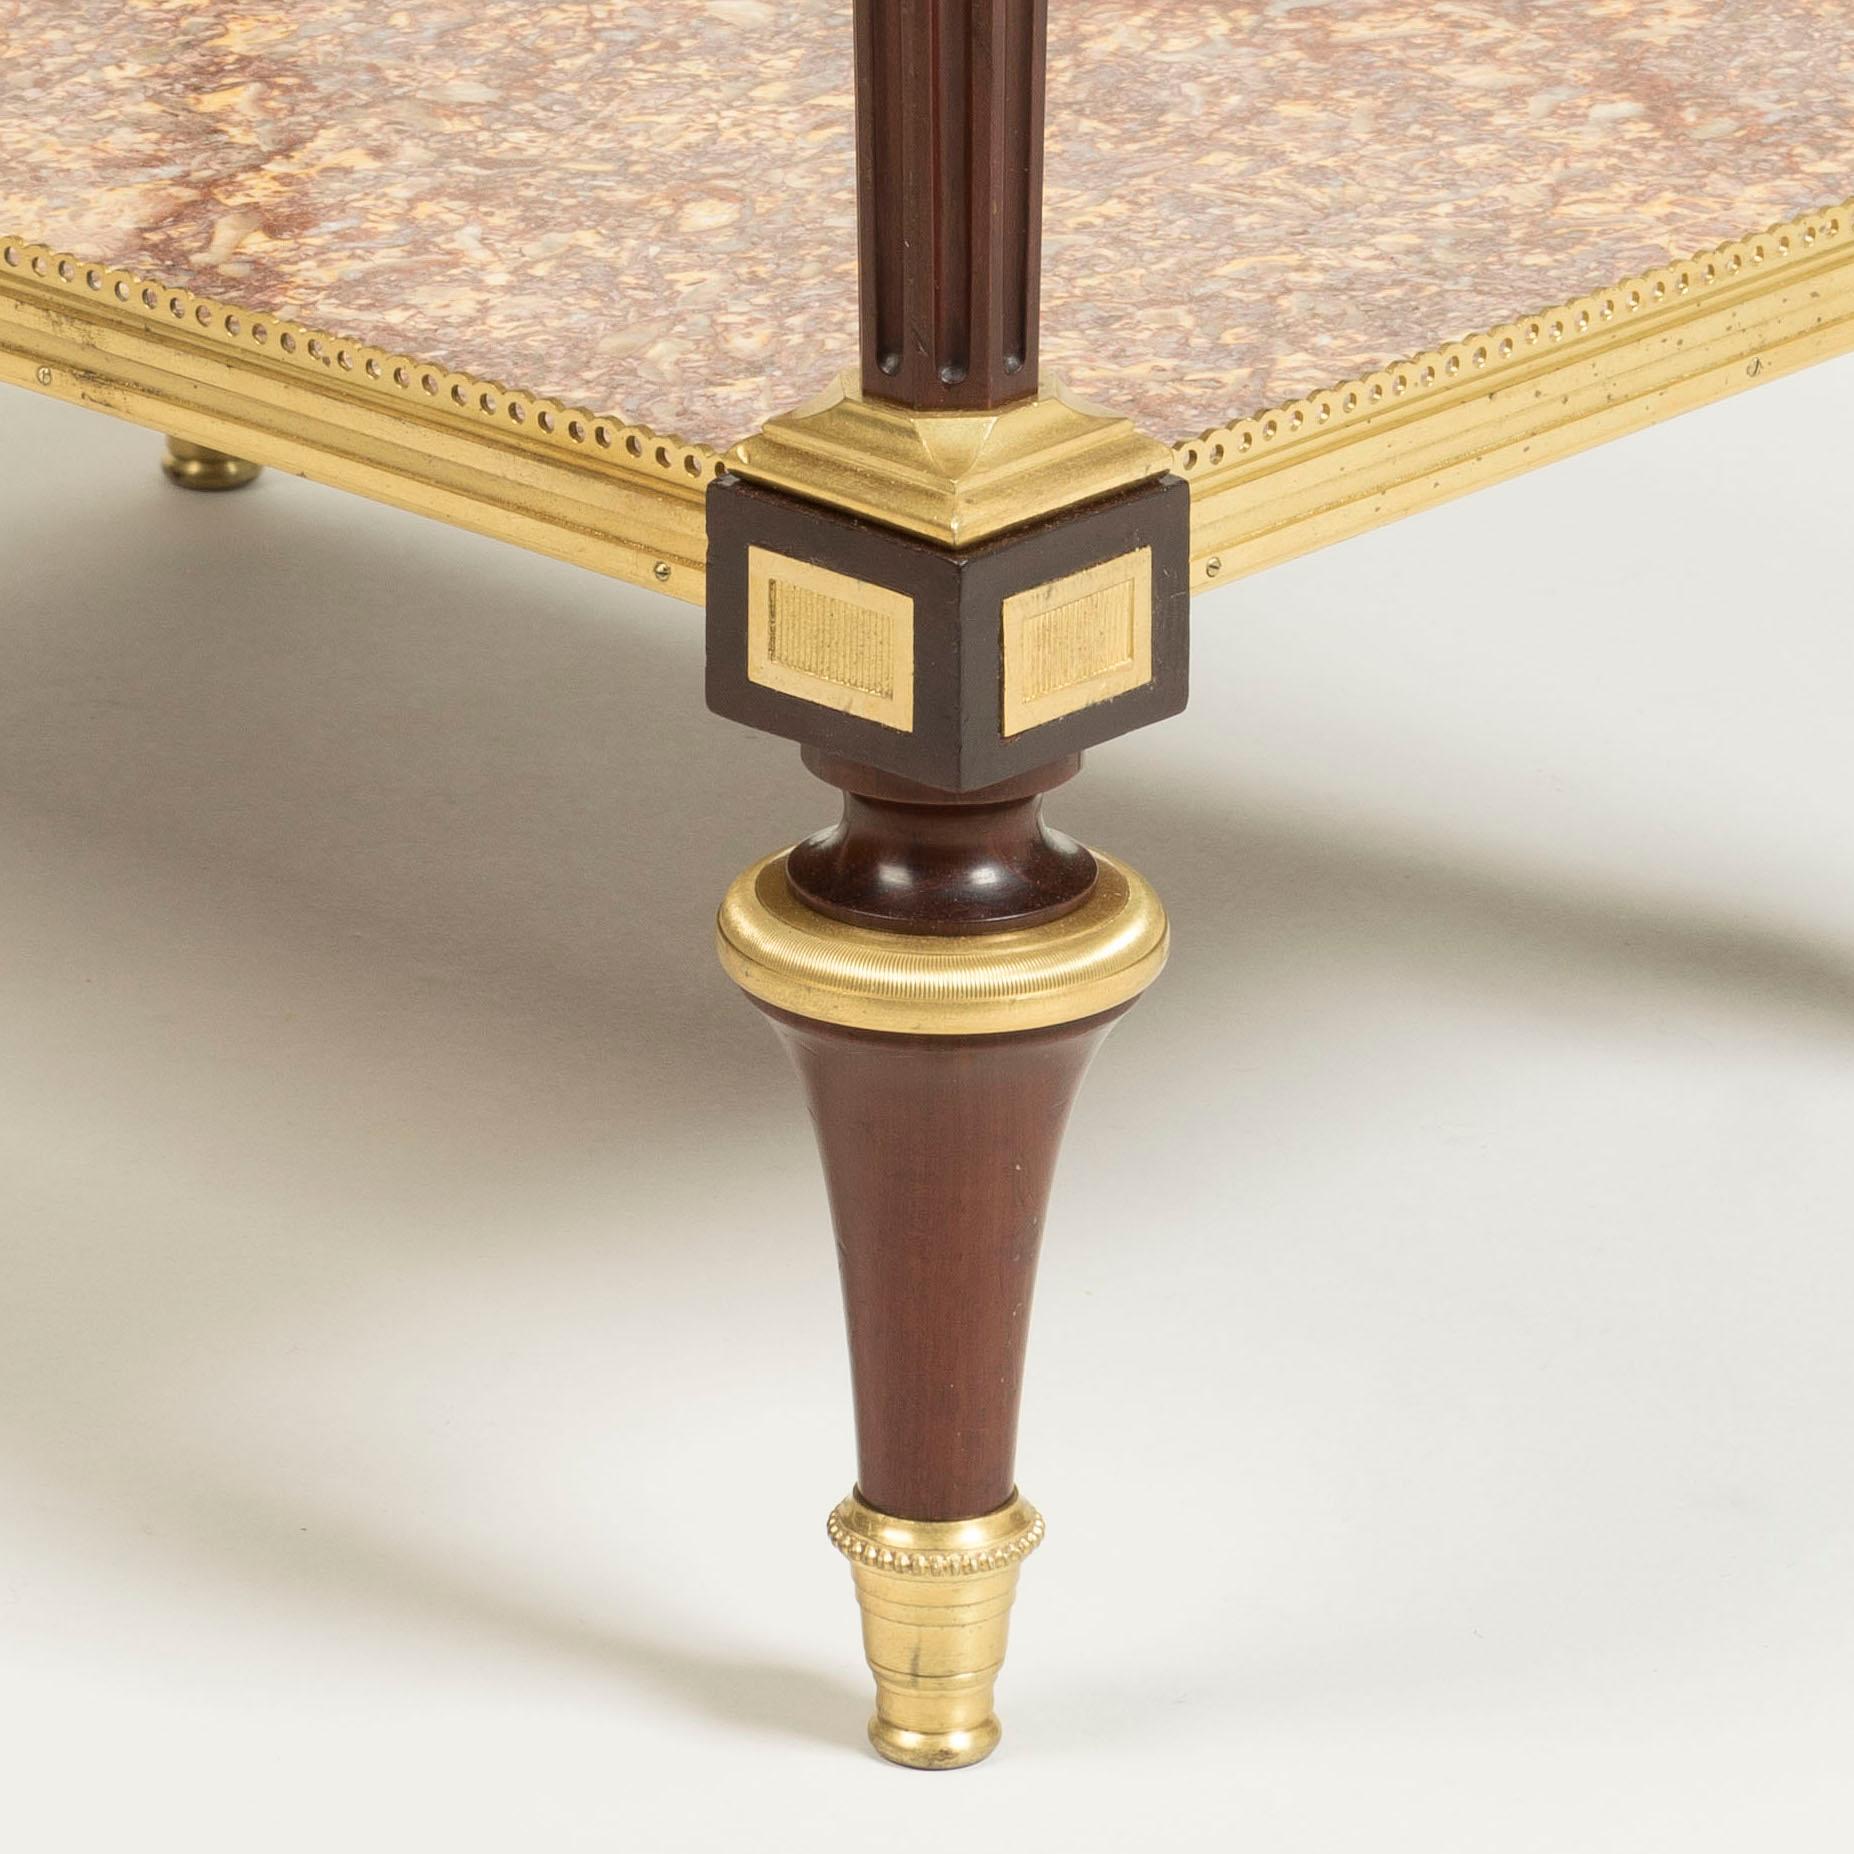 Exceptional 19th Century French Marble-Top Mahogany Table by Henry Dasson In Good Condition For Sale In London, GB